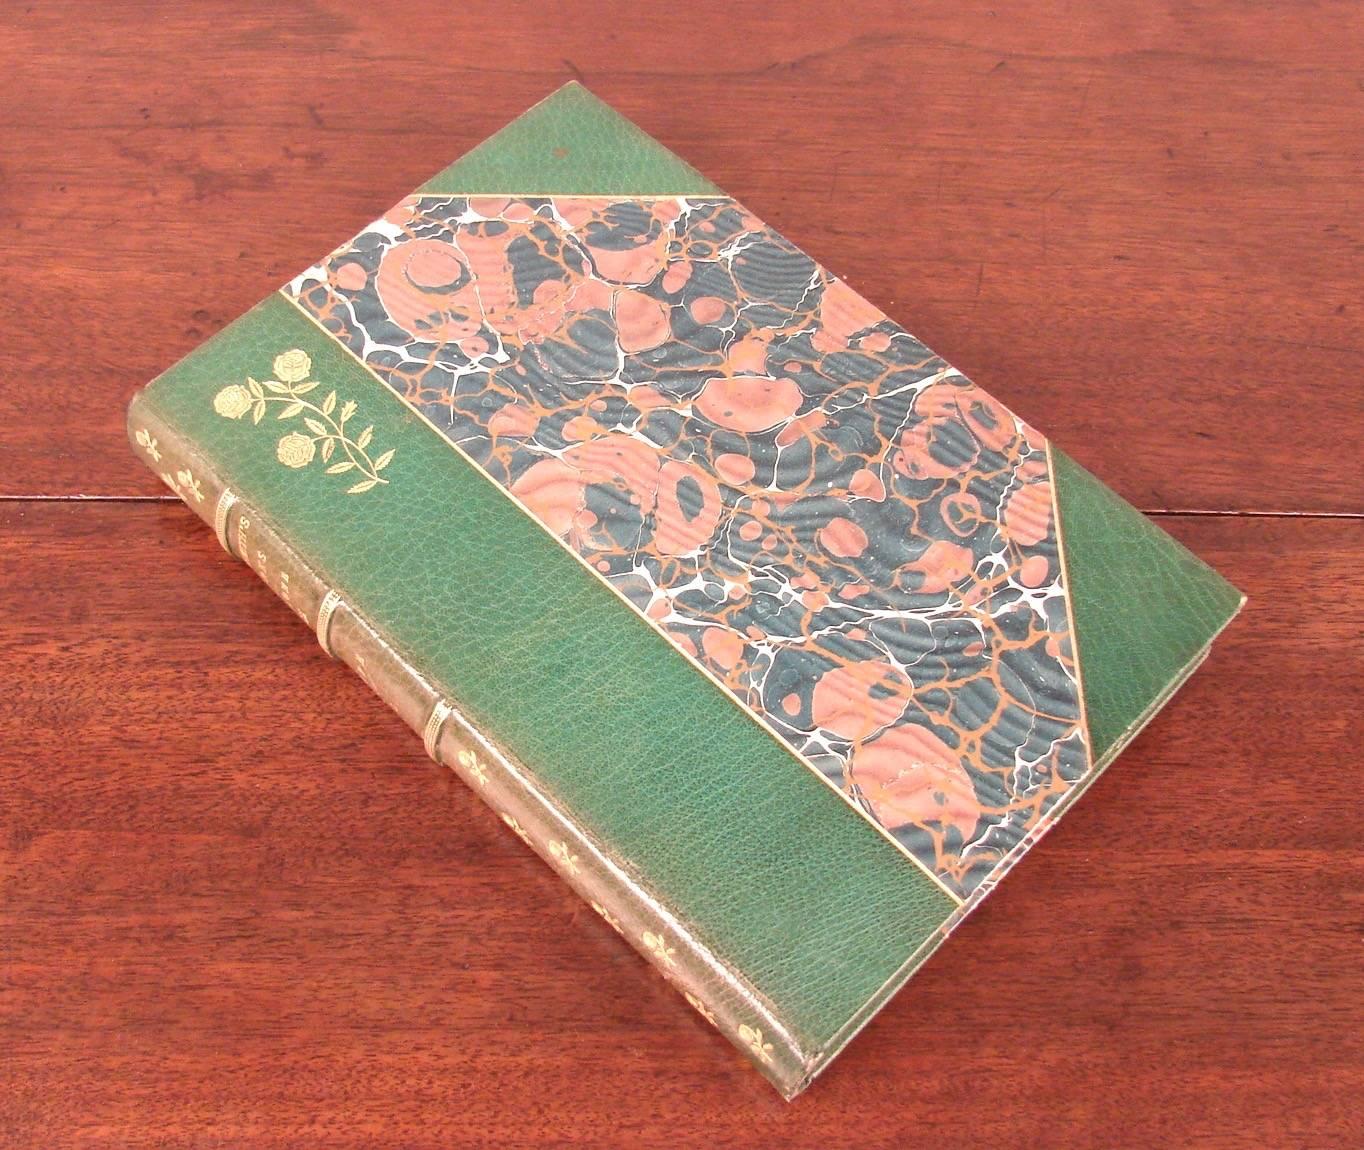 A fine limited edition (#169 of 500) beautifully bound 12 volume set, The Works of Oliver Goldsmith, Wakefield Edition, published by Harper and Brothers, N.Y. in 3/4 green crushed Moroccan leather with marbleized boards and raised bands with gilt